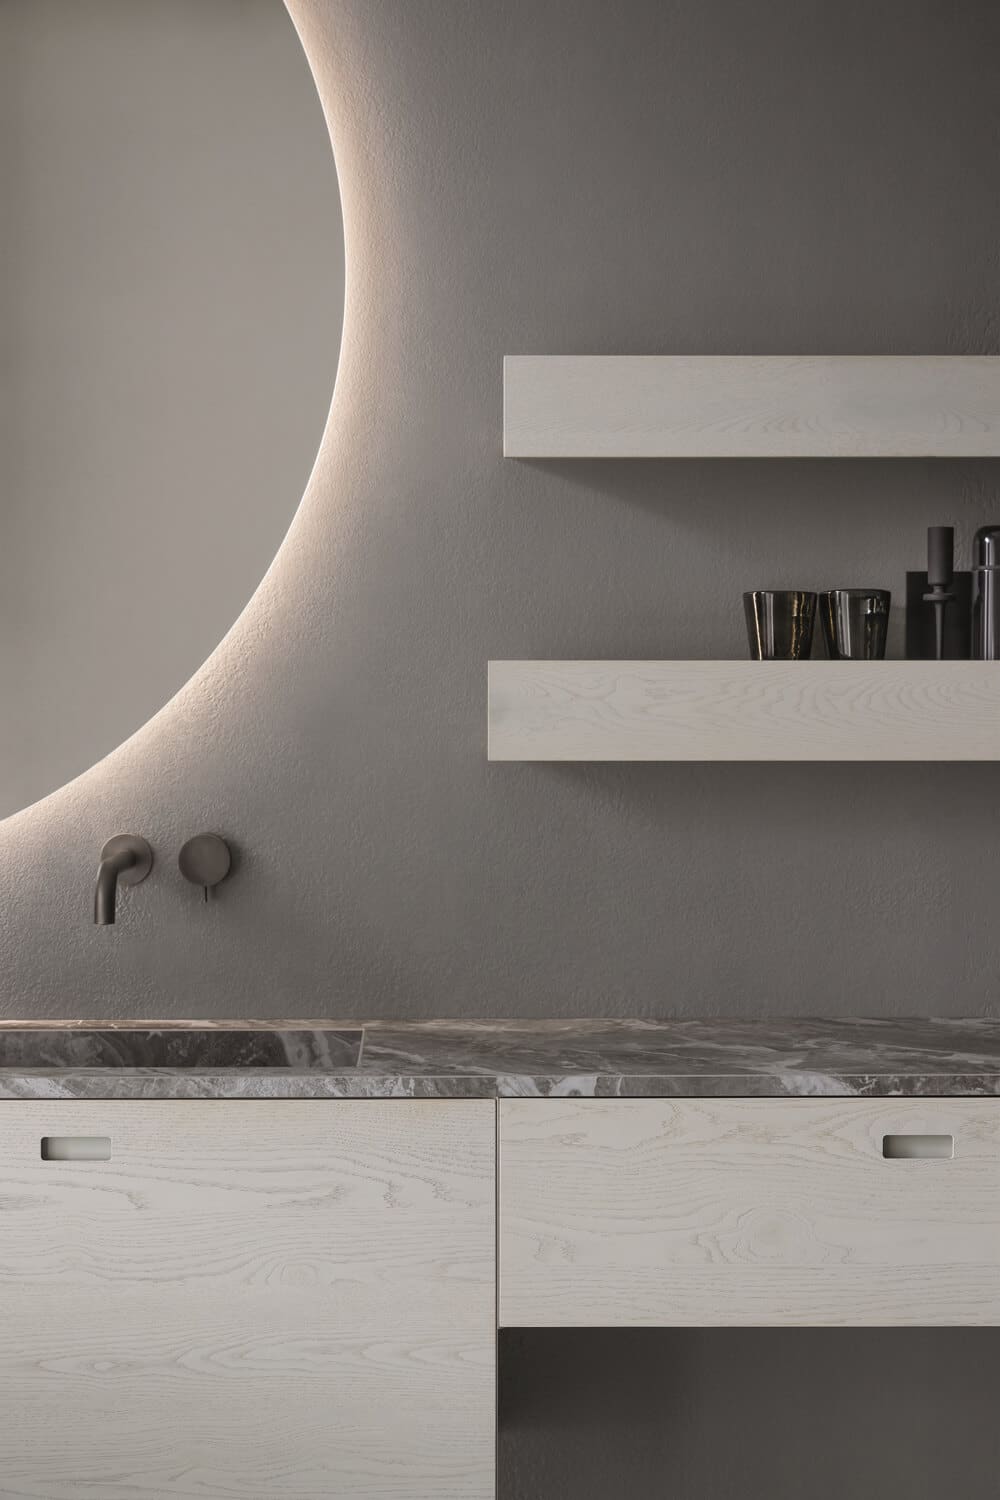 Cabinets in Rovere Bianco wood veneer with integrated handles.